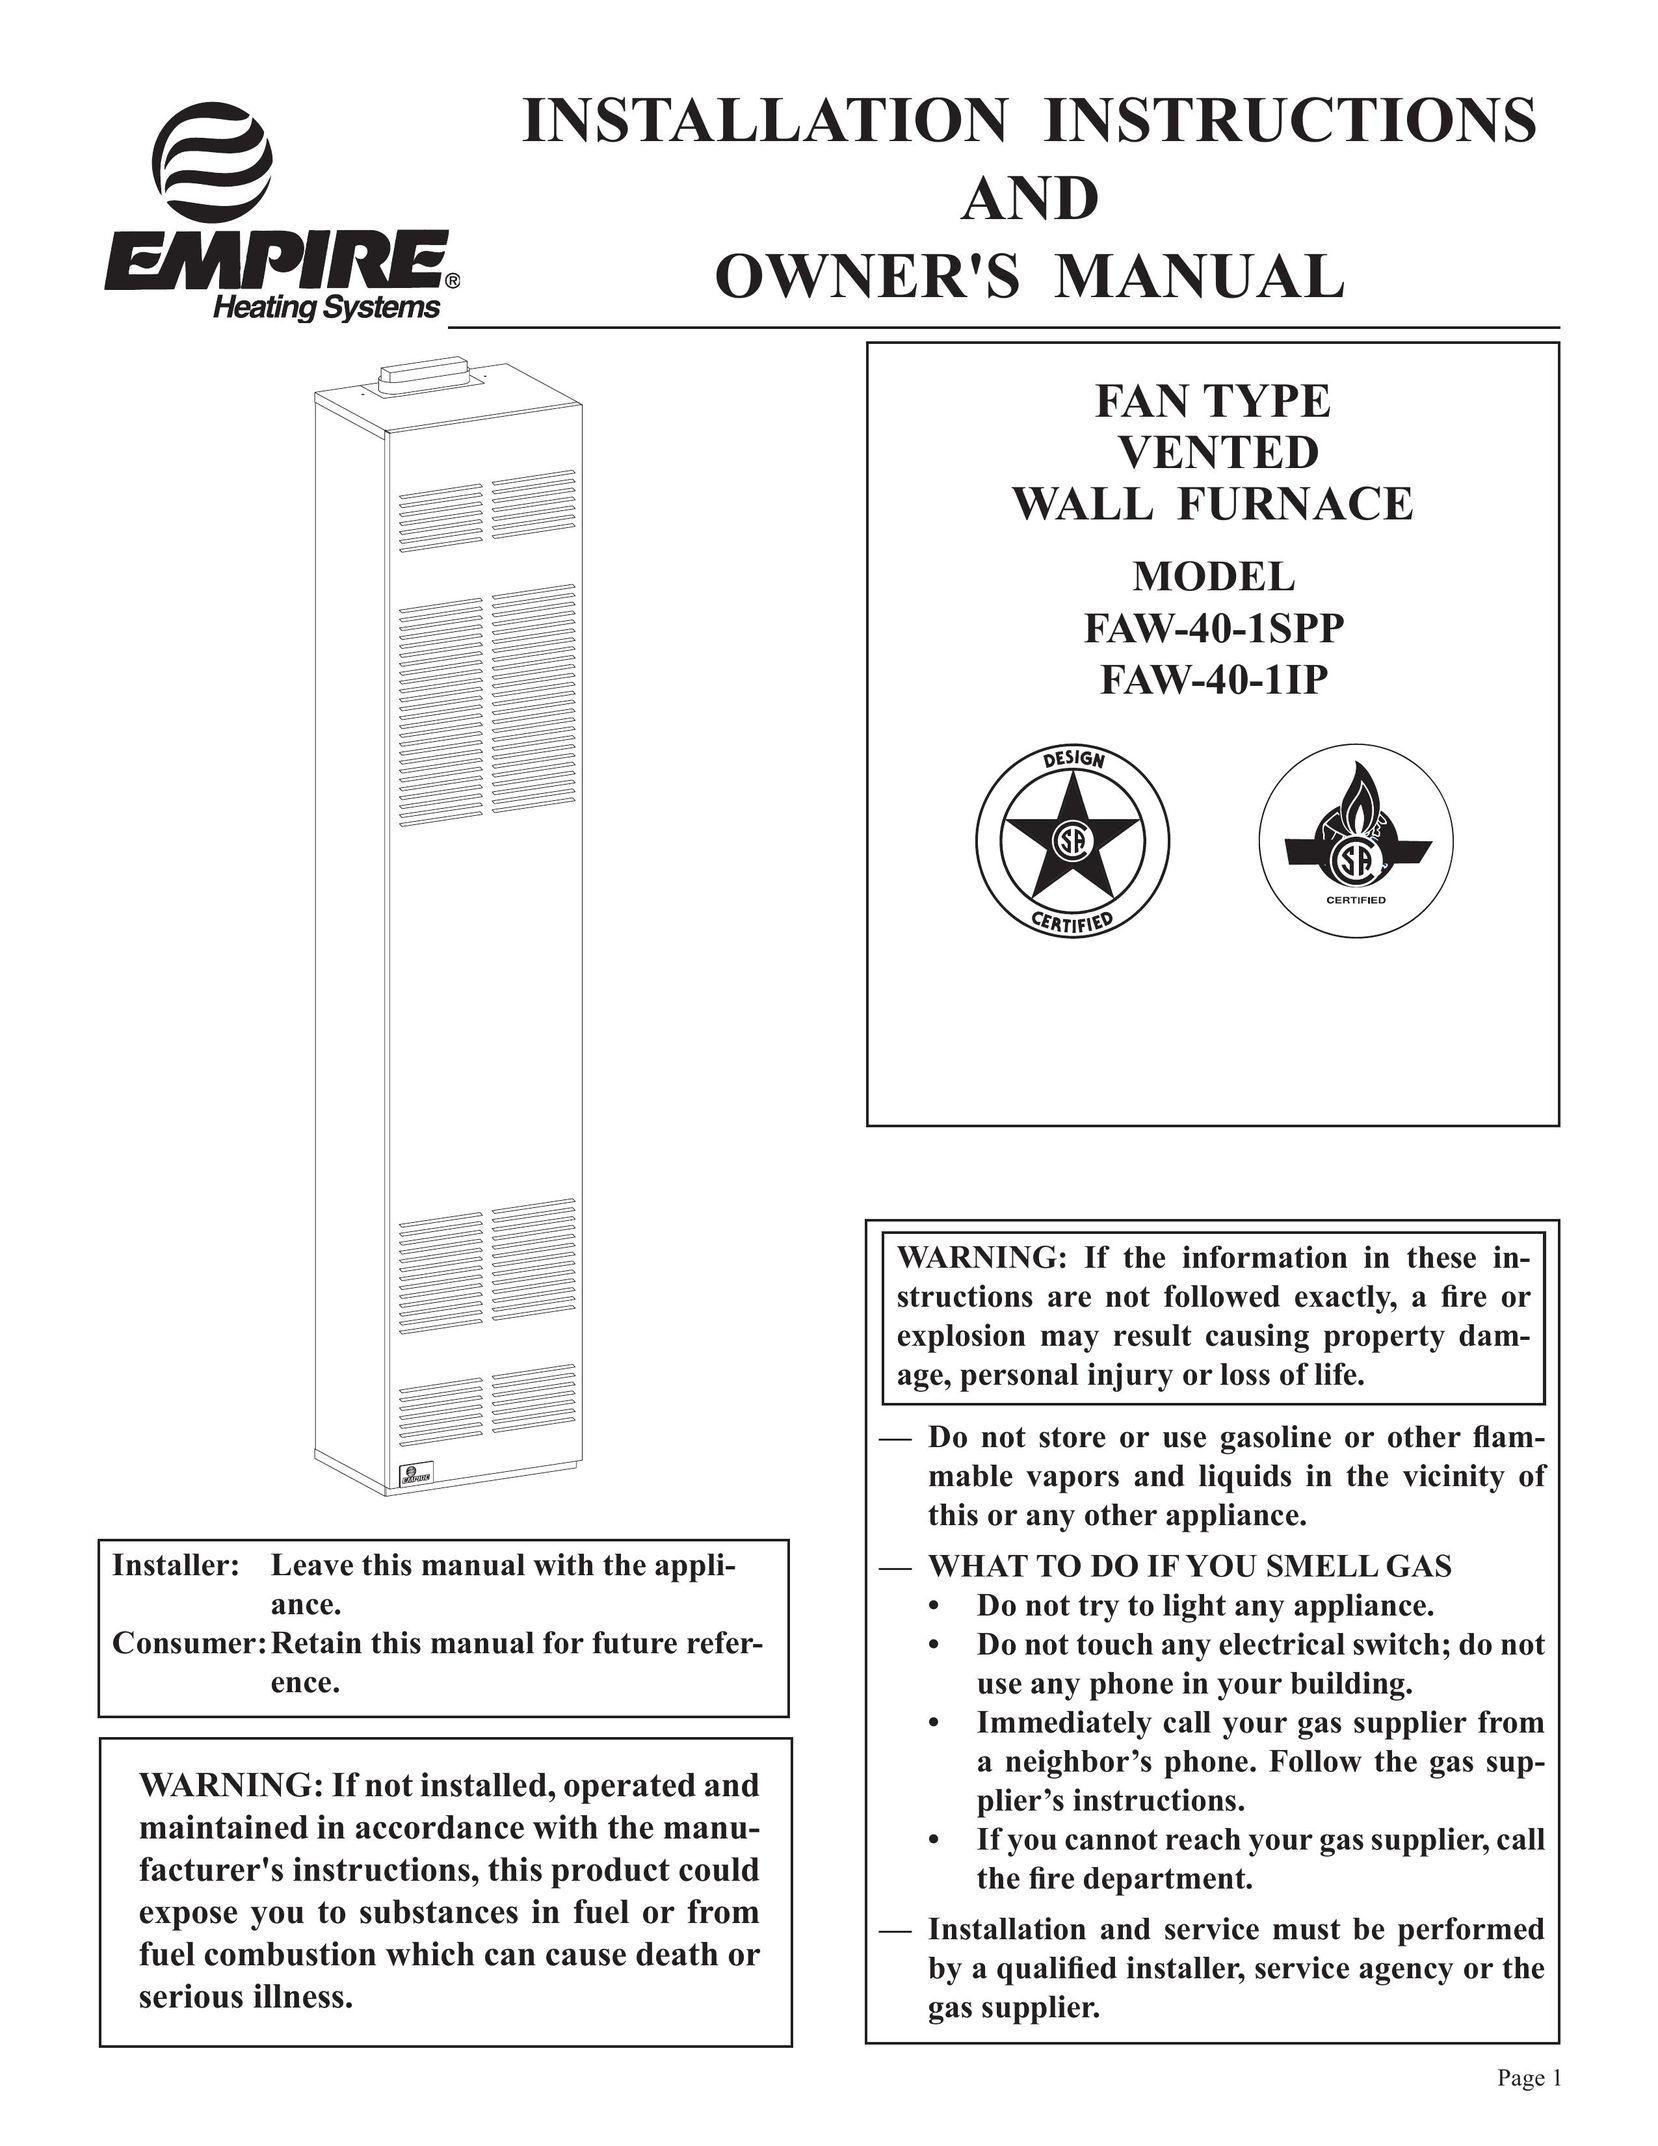 Empire Comfort Systems FAW-40-1SPP Furnace User Manual